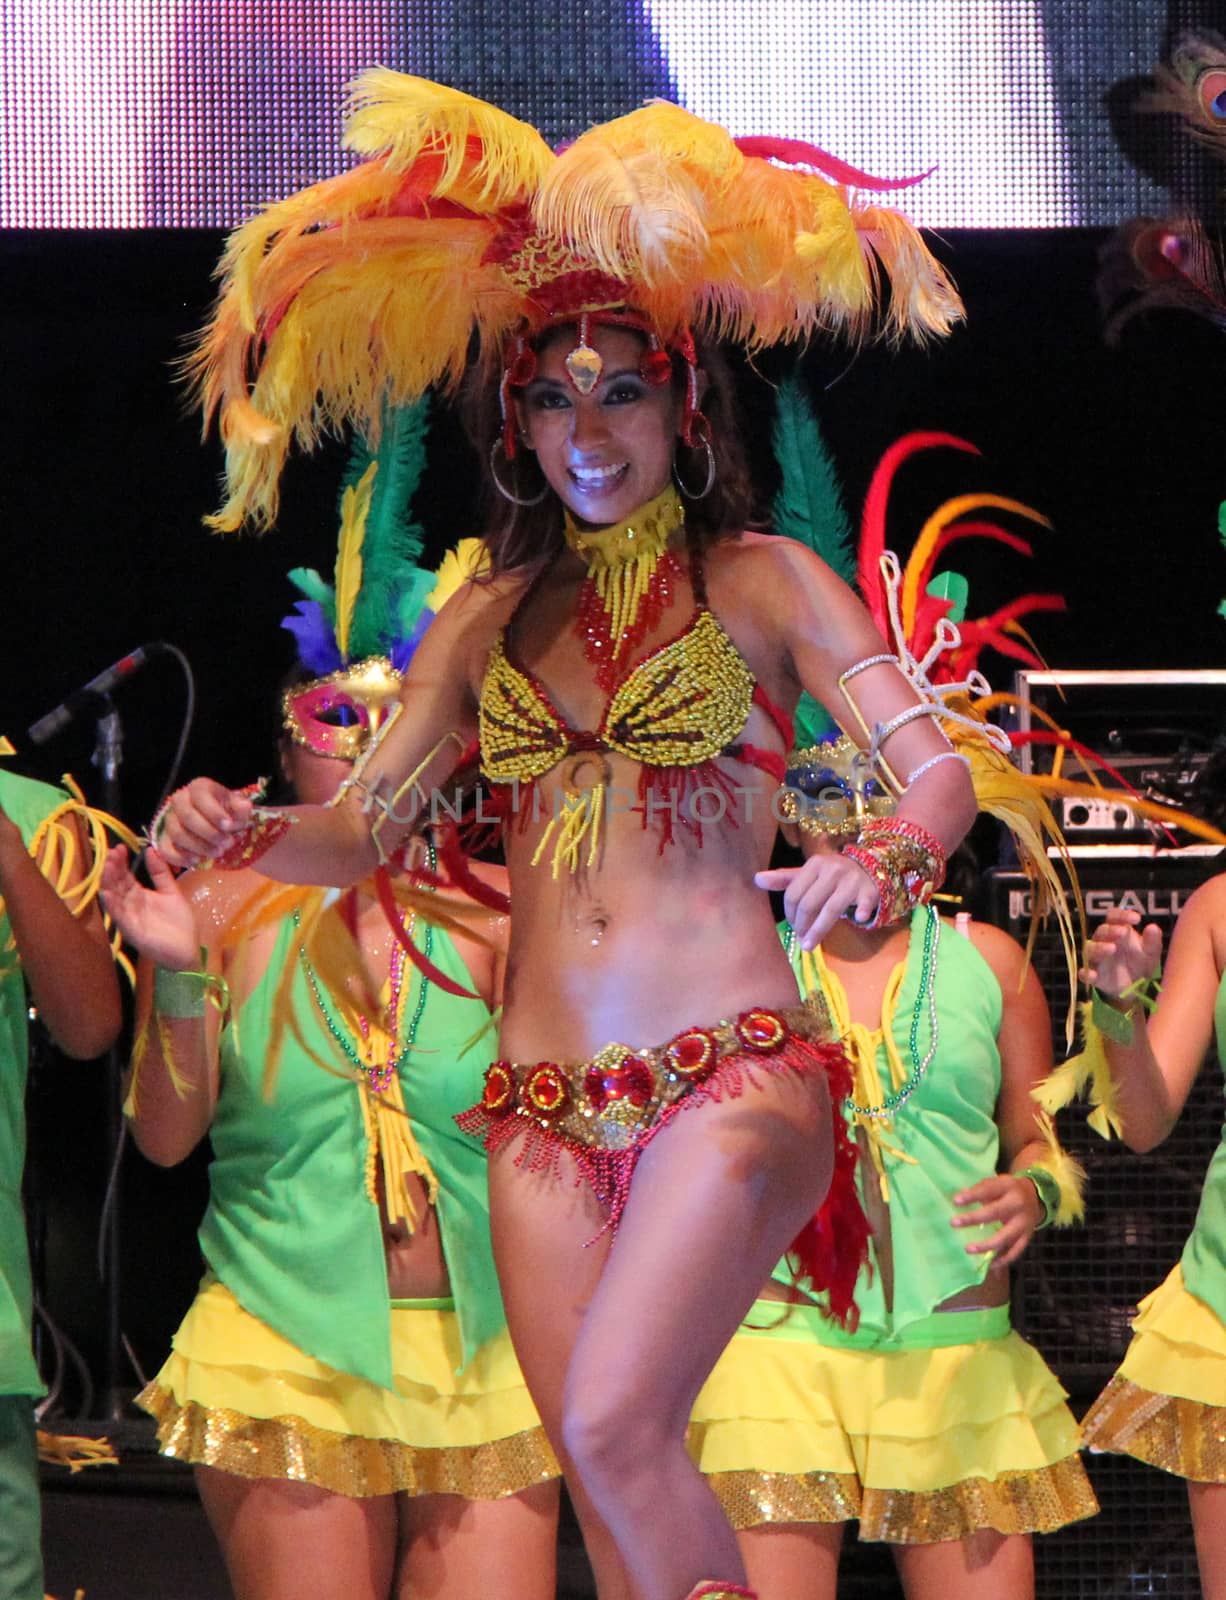 Entertainers performing on stage at a carnaval in Playa del Carmen, Mexico 10 Feb 2013 No model release Editorial use only